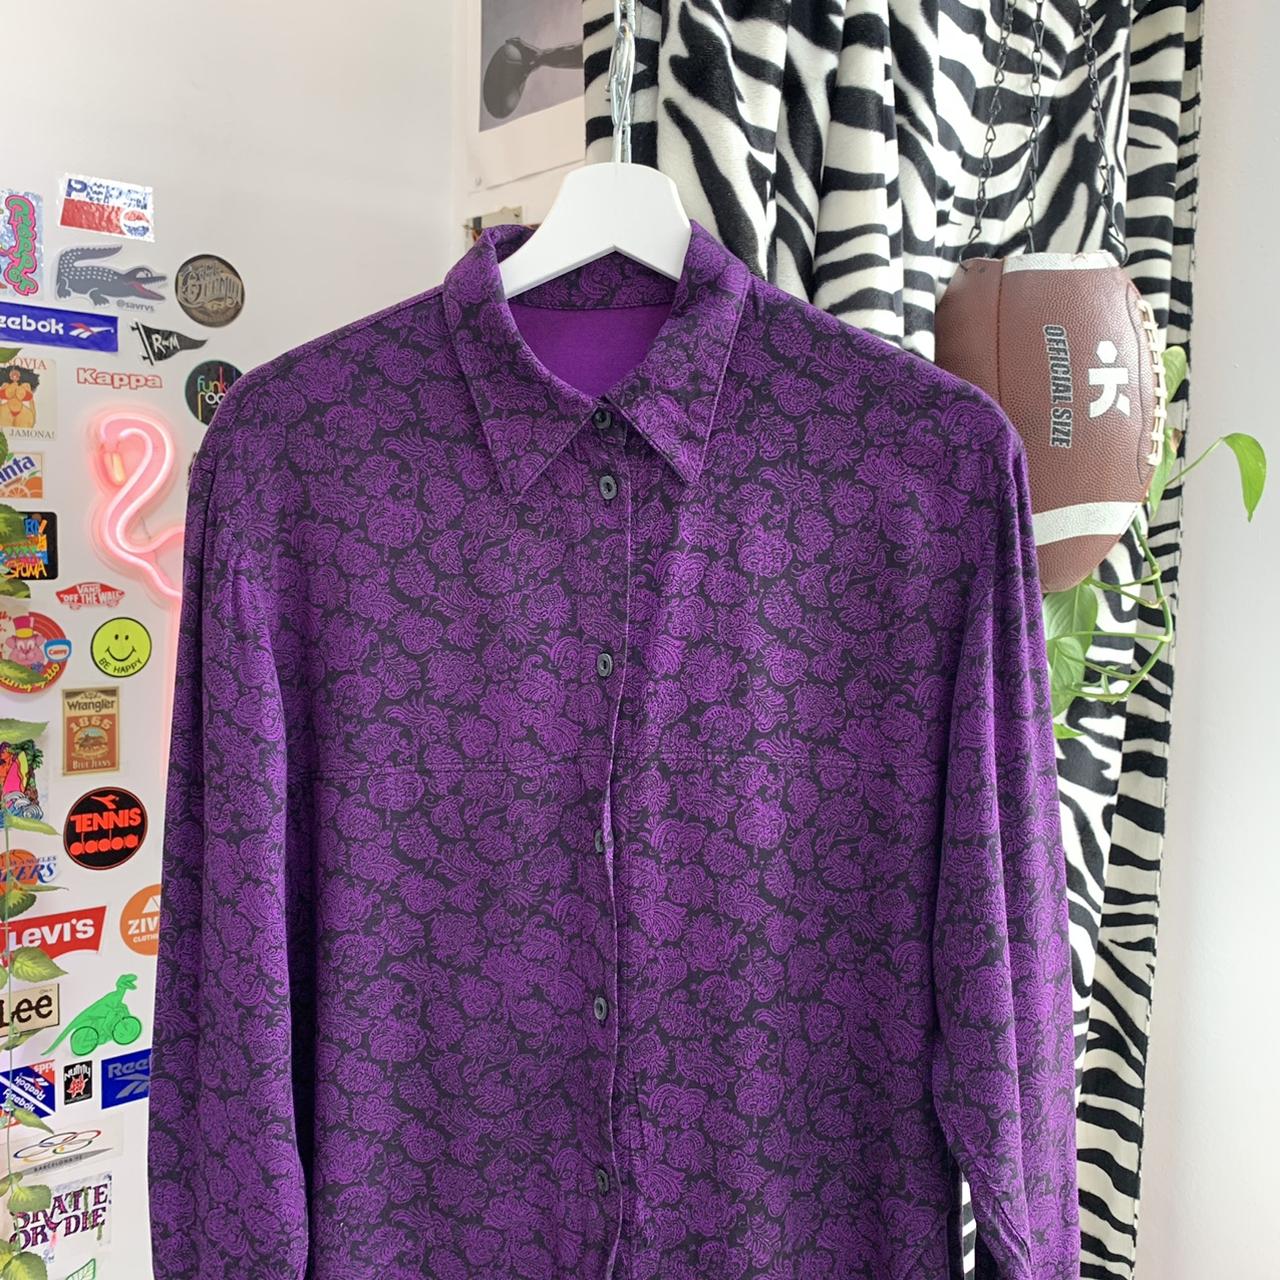 Product Image 2 - Camisa Witch
Talla: S chico /